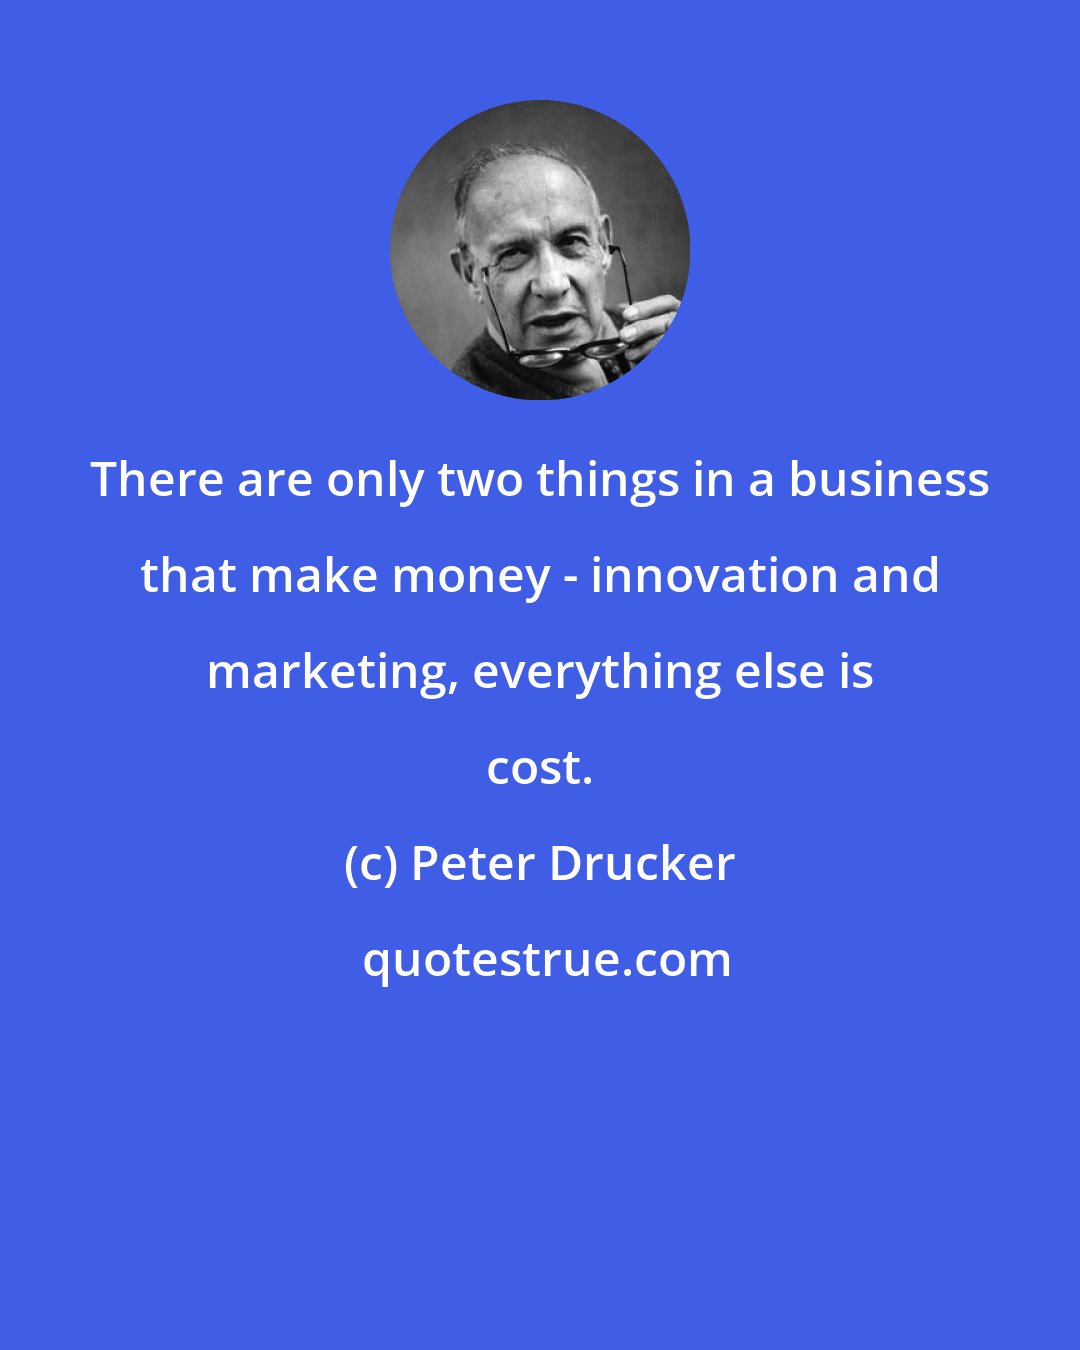 Peter Drucker: There are only two things in a business that make money - innovation and marketing, everything else is cost.